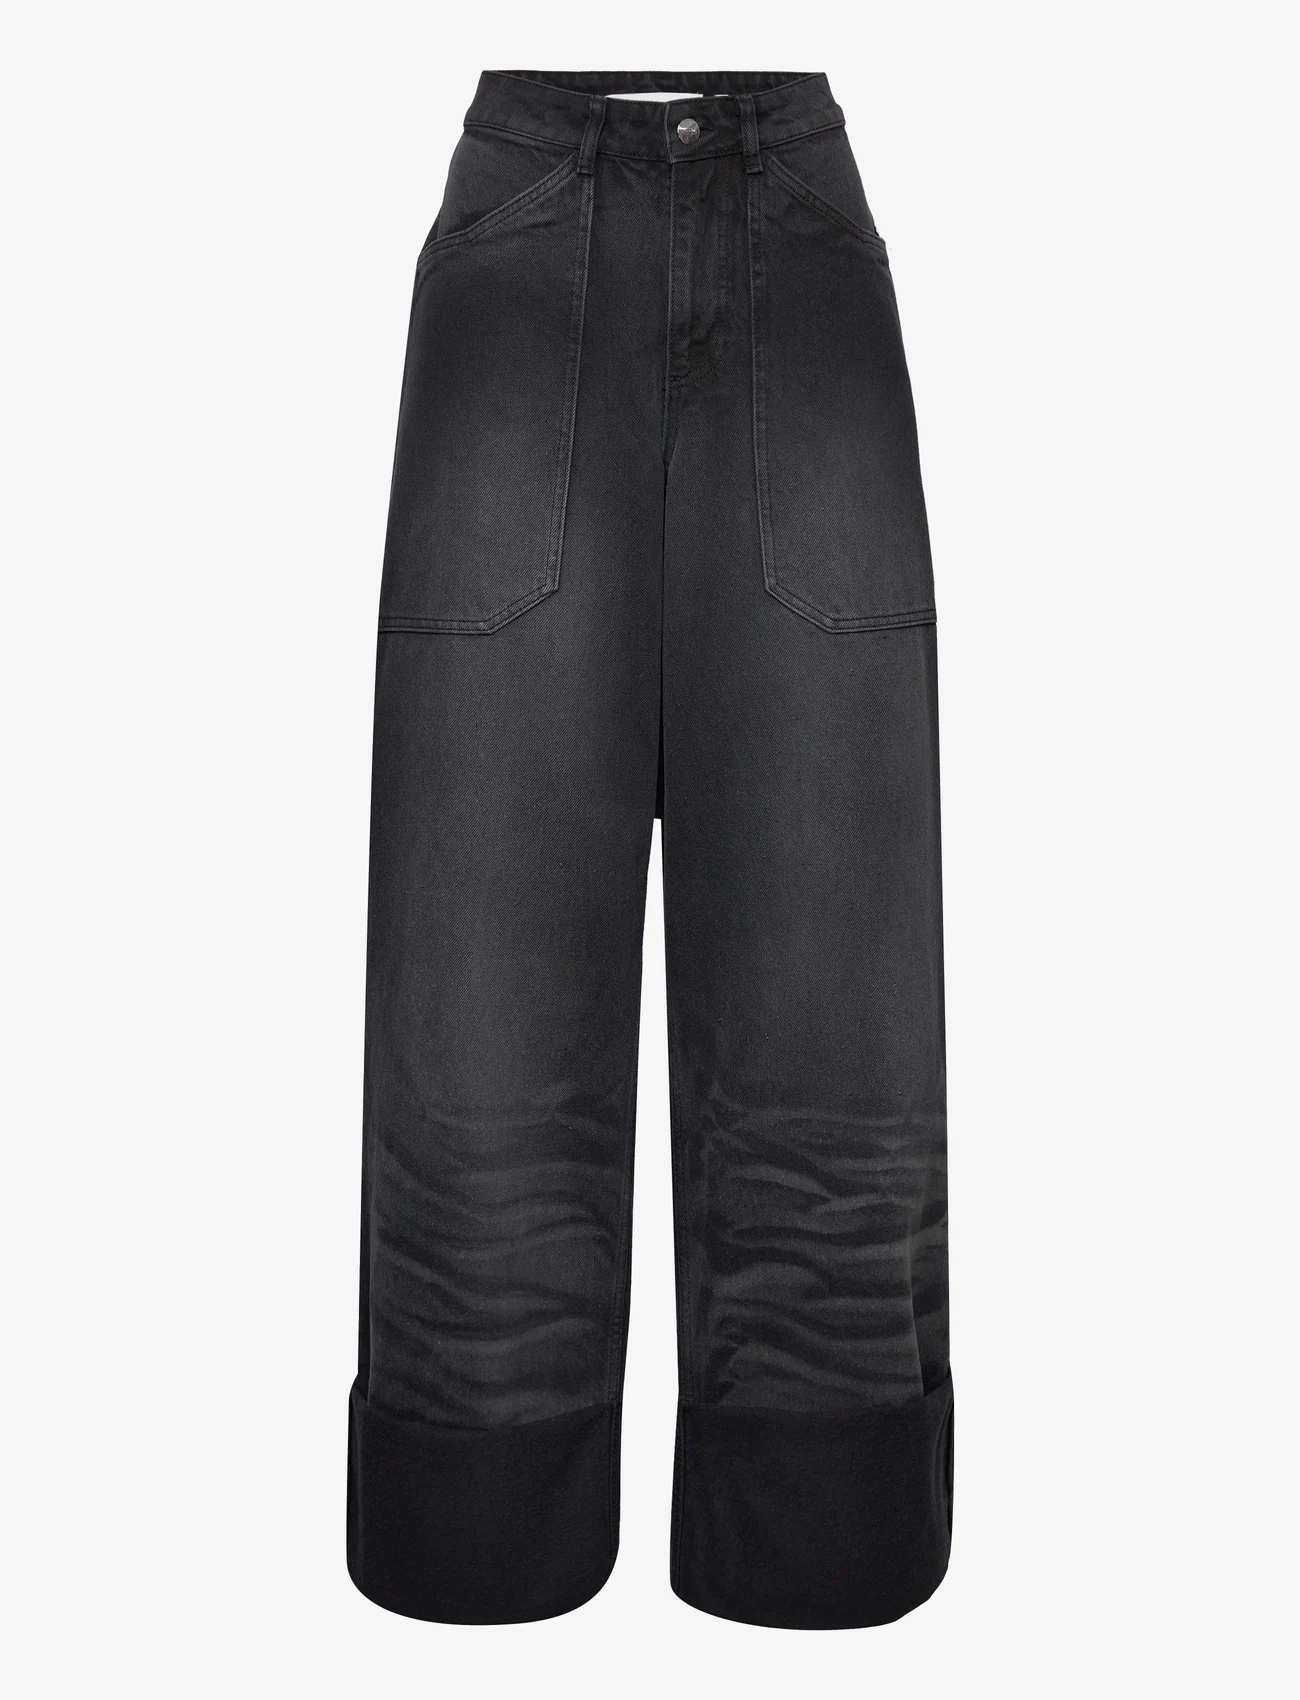 Cannari Concept - Black Wash Loose Jeans - vide jeans - forged iron - 0